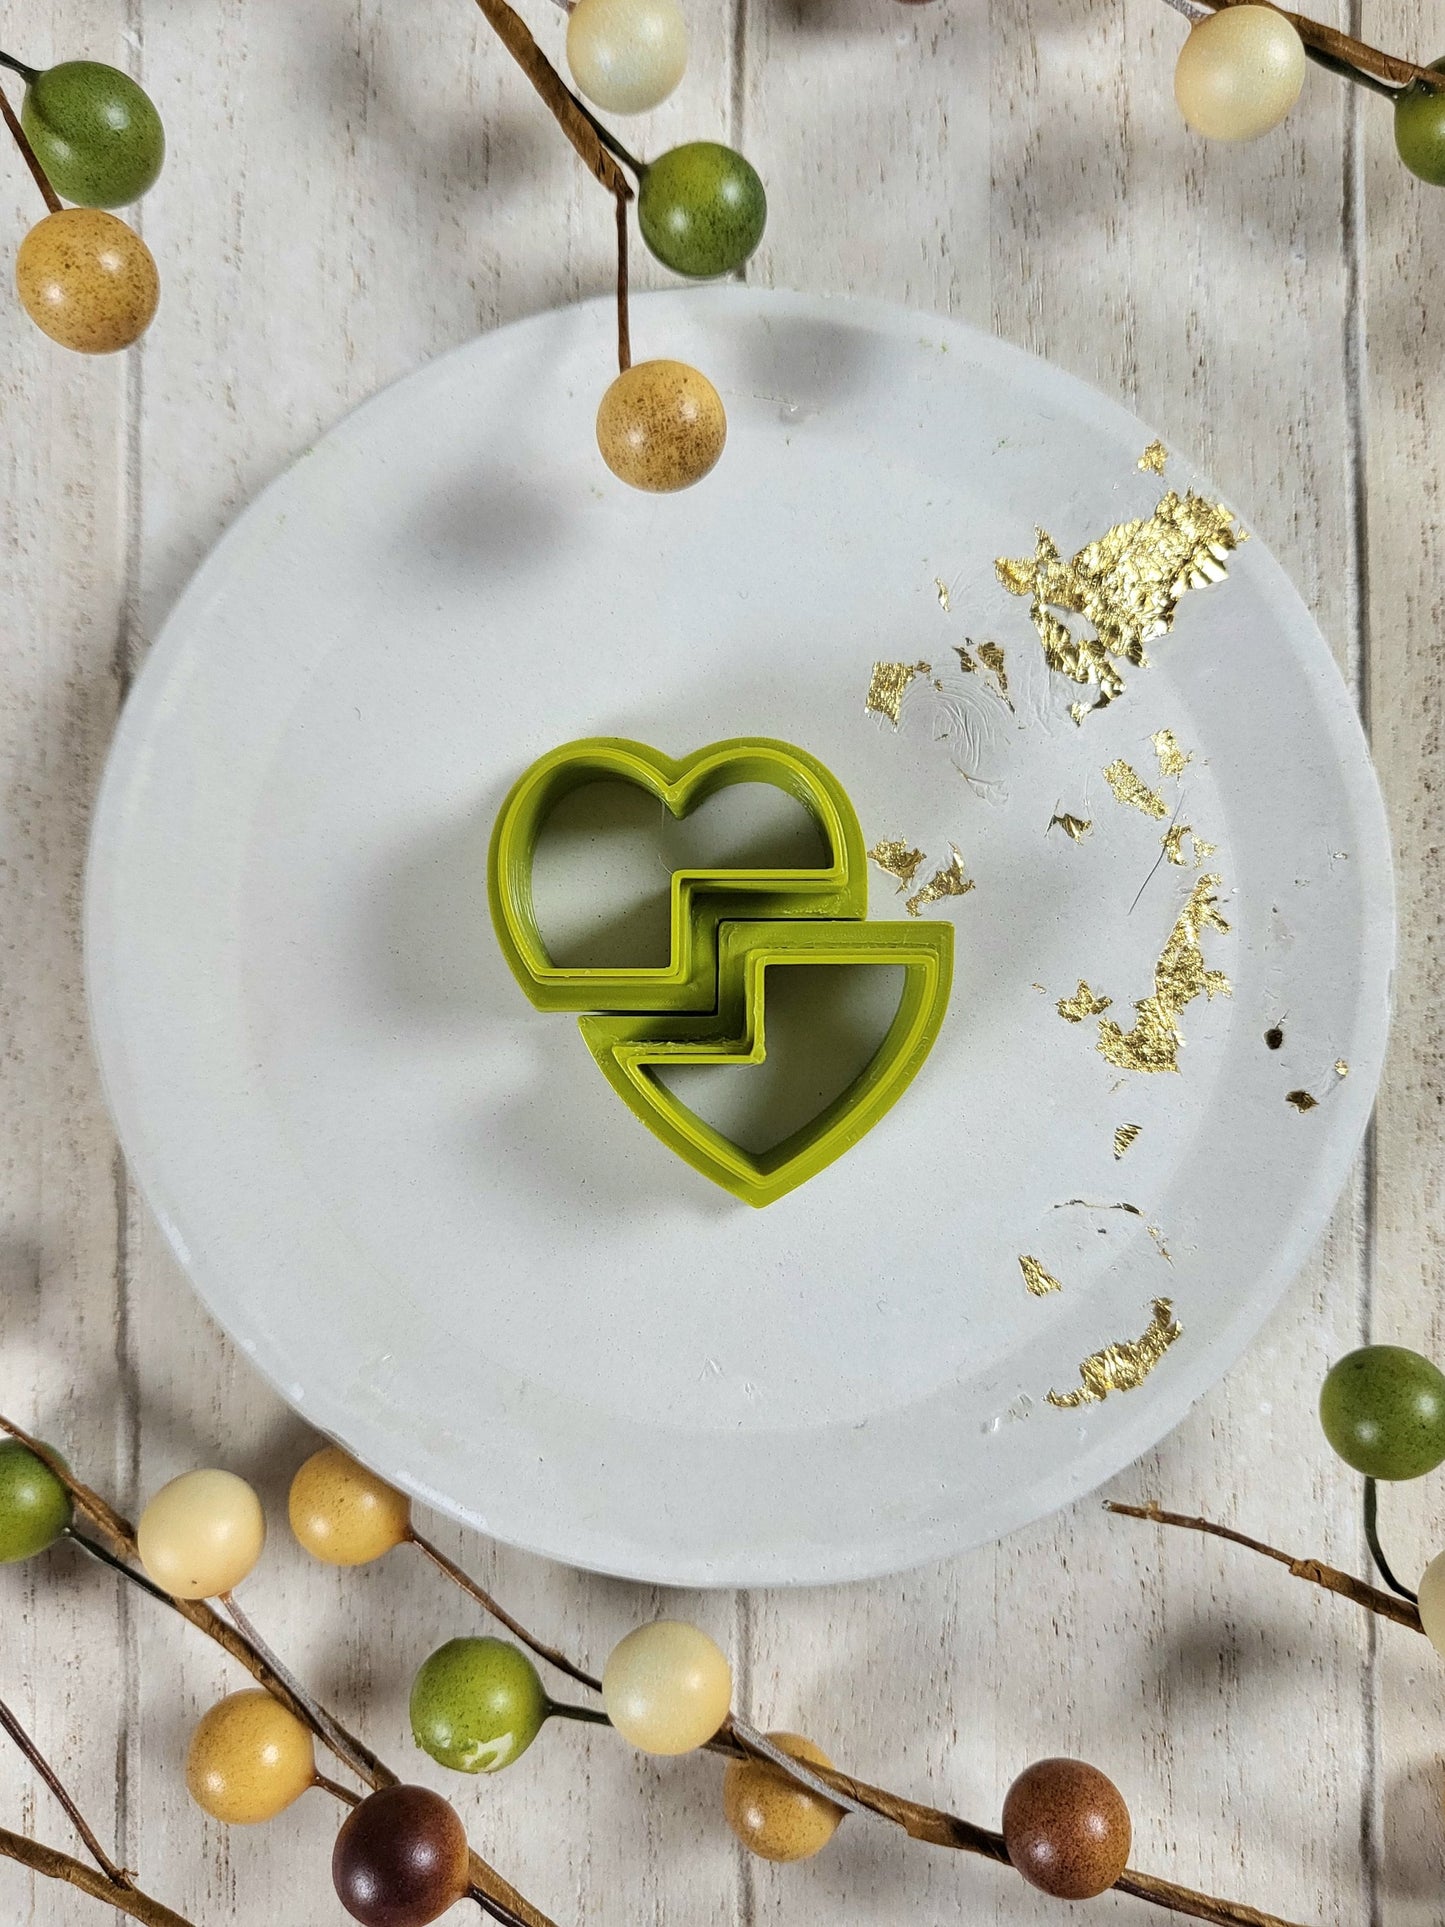 2pc Heart Clay Cutter – Olive the Stuff